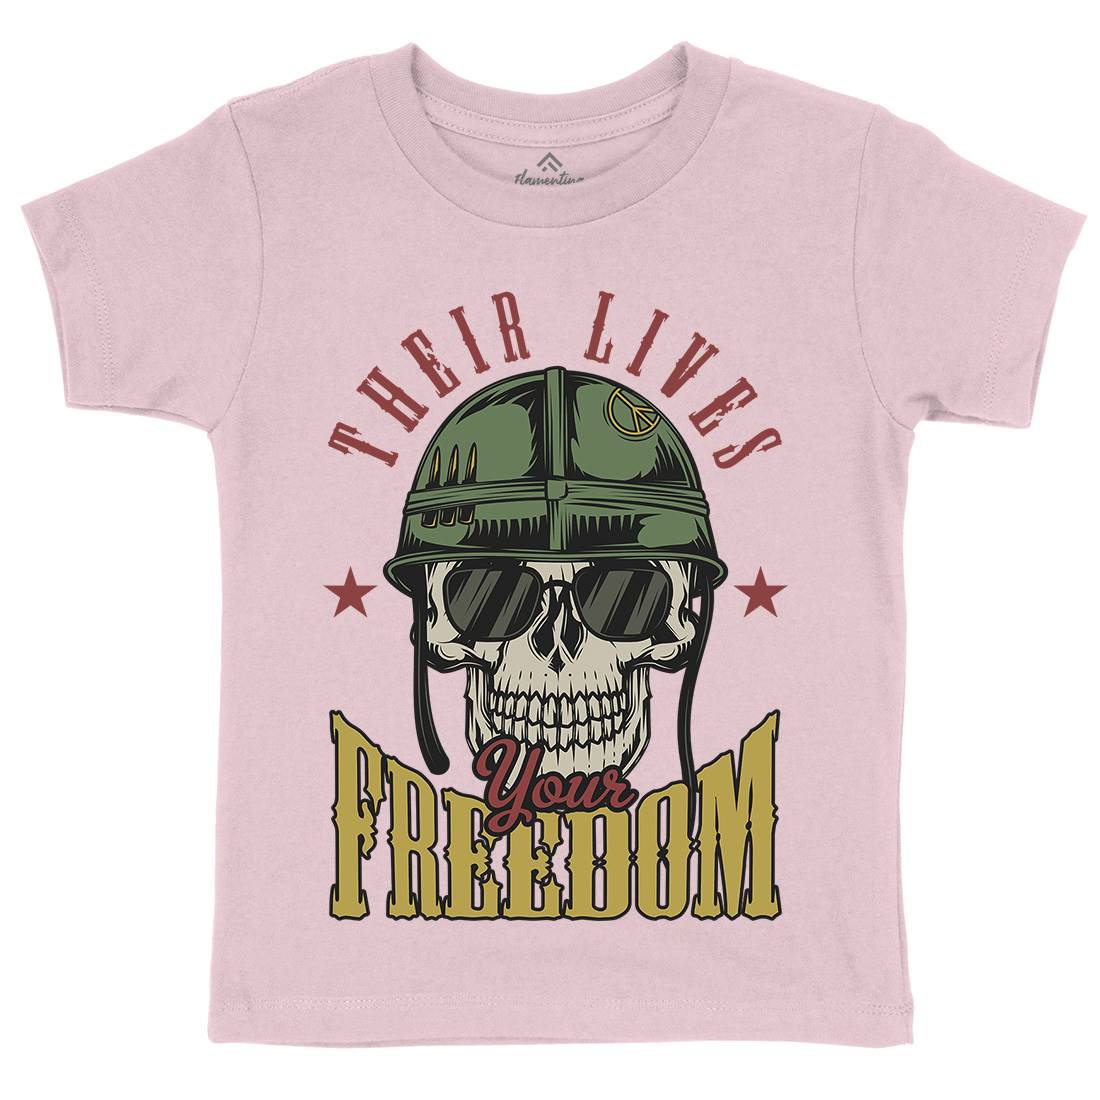 Your Freedom Kids Crew Neck T-Shirt Army C899